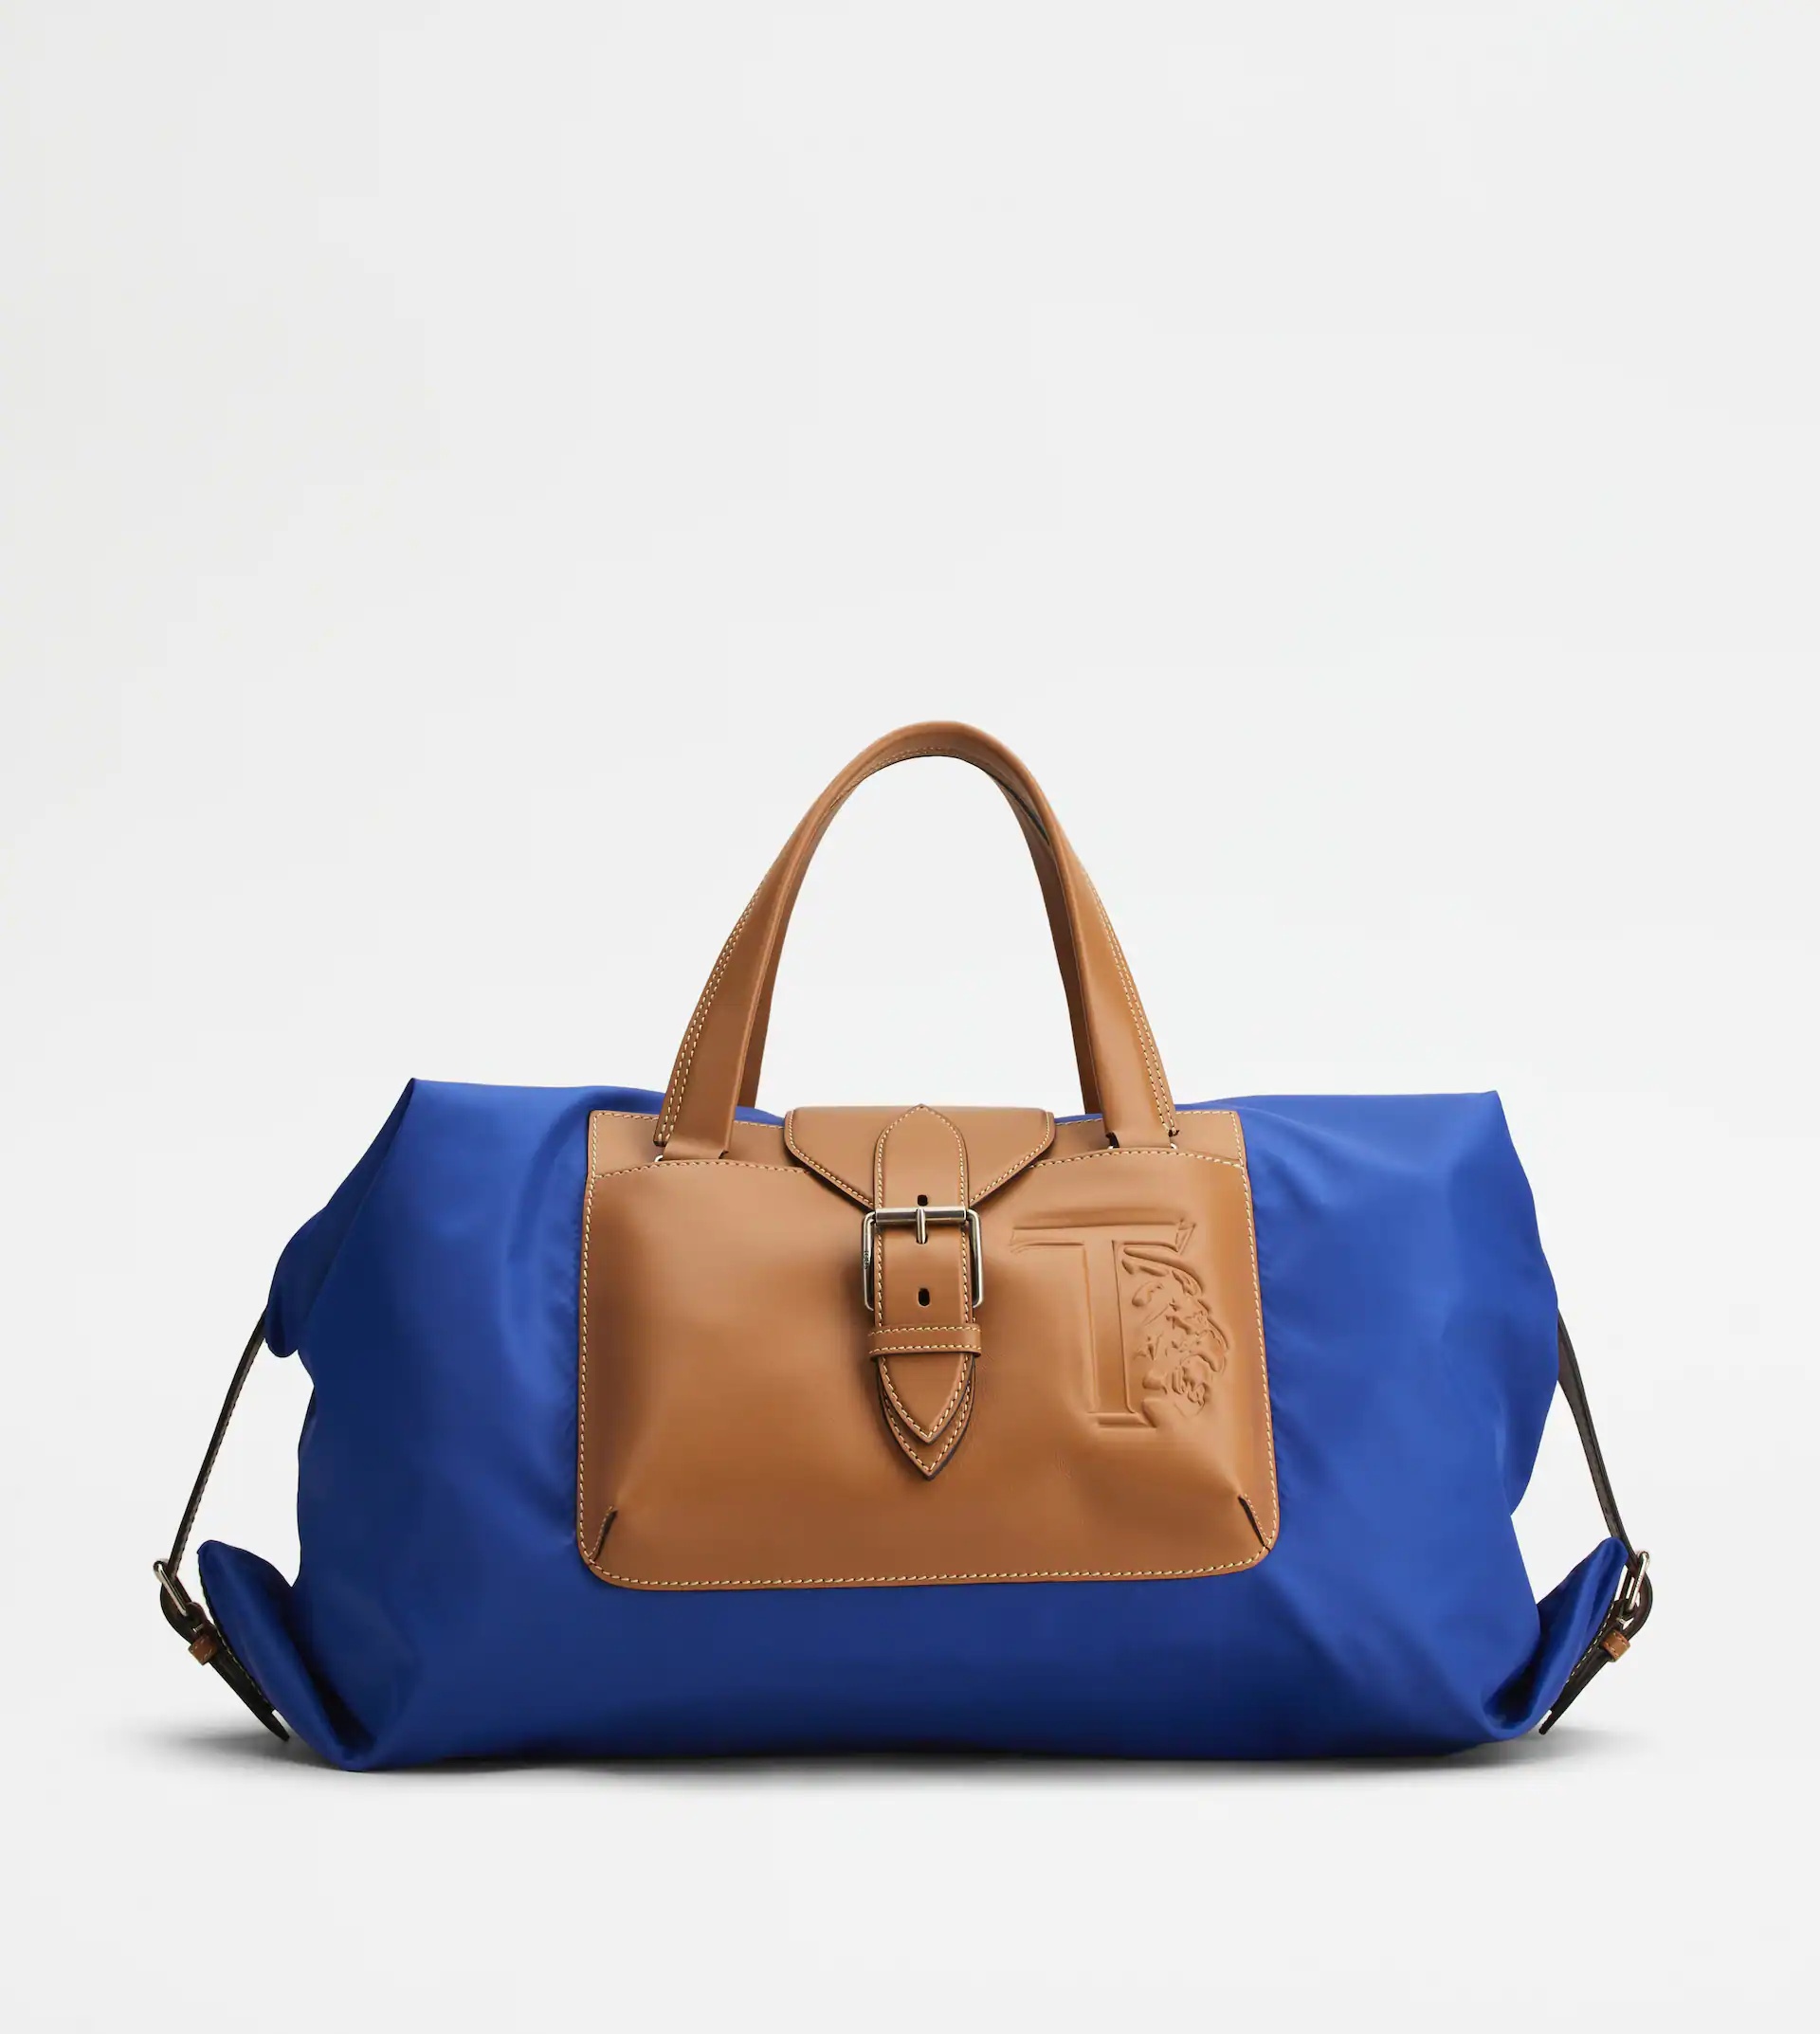 DUFFLE BAG IN FABRIC AND LEATHER MEDIUM - BLUE, BROWN - 1